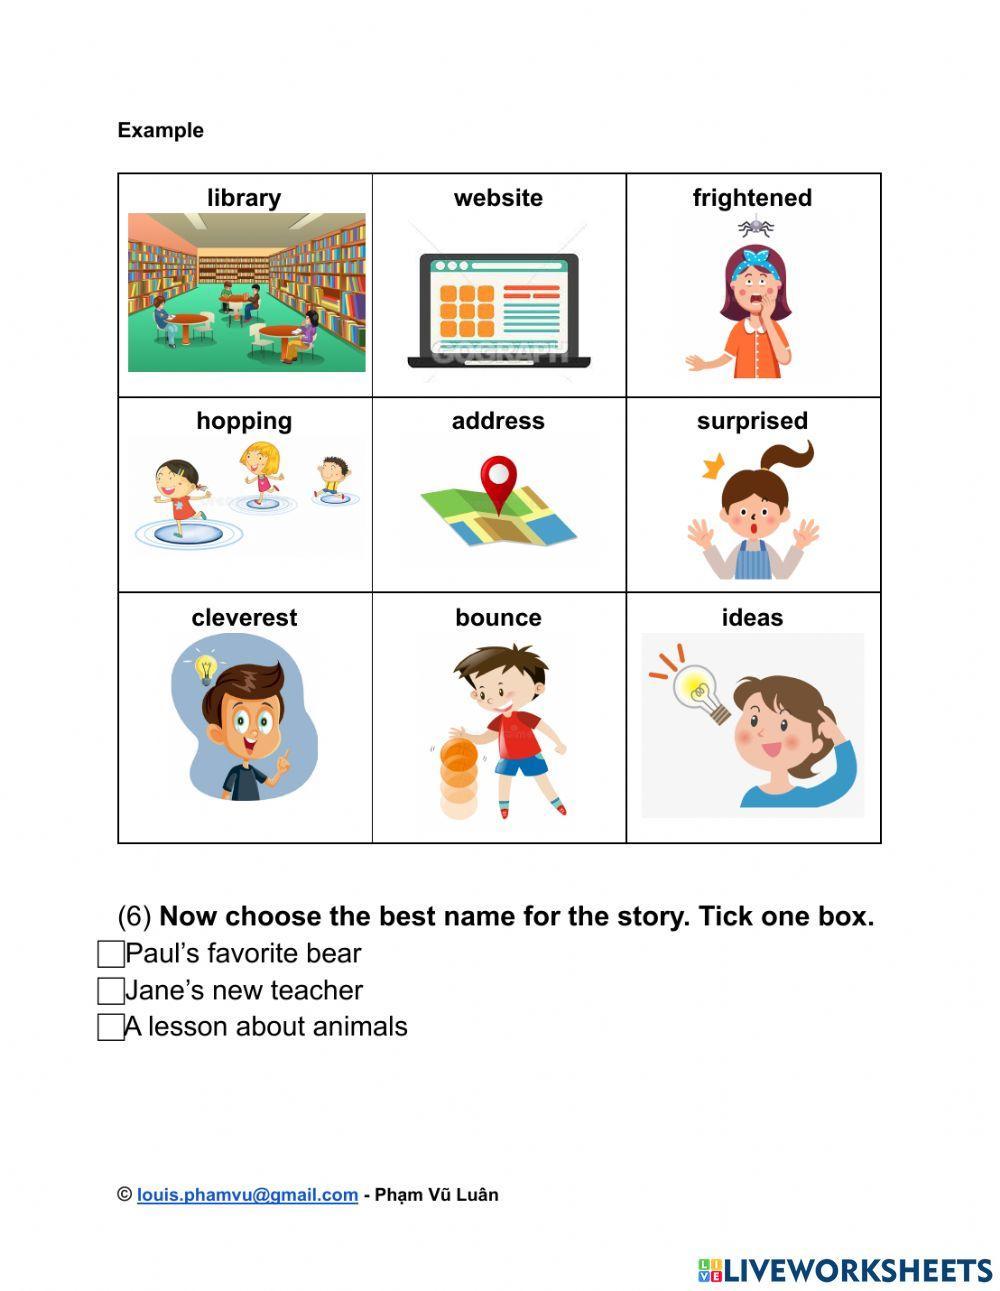 A1 Movers Reading & Writing Part 3 – Sample Test worksheet | Live Worksheets